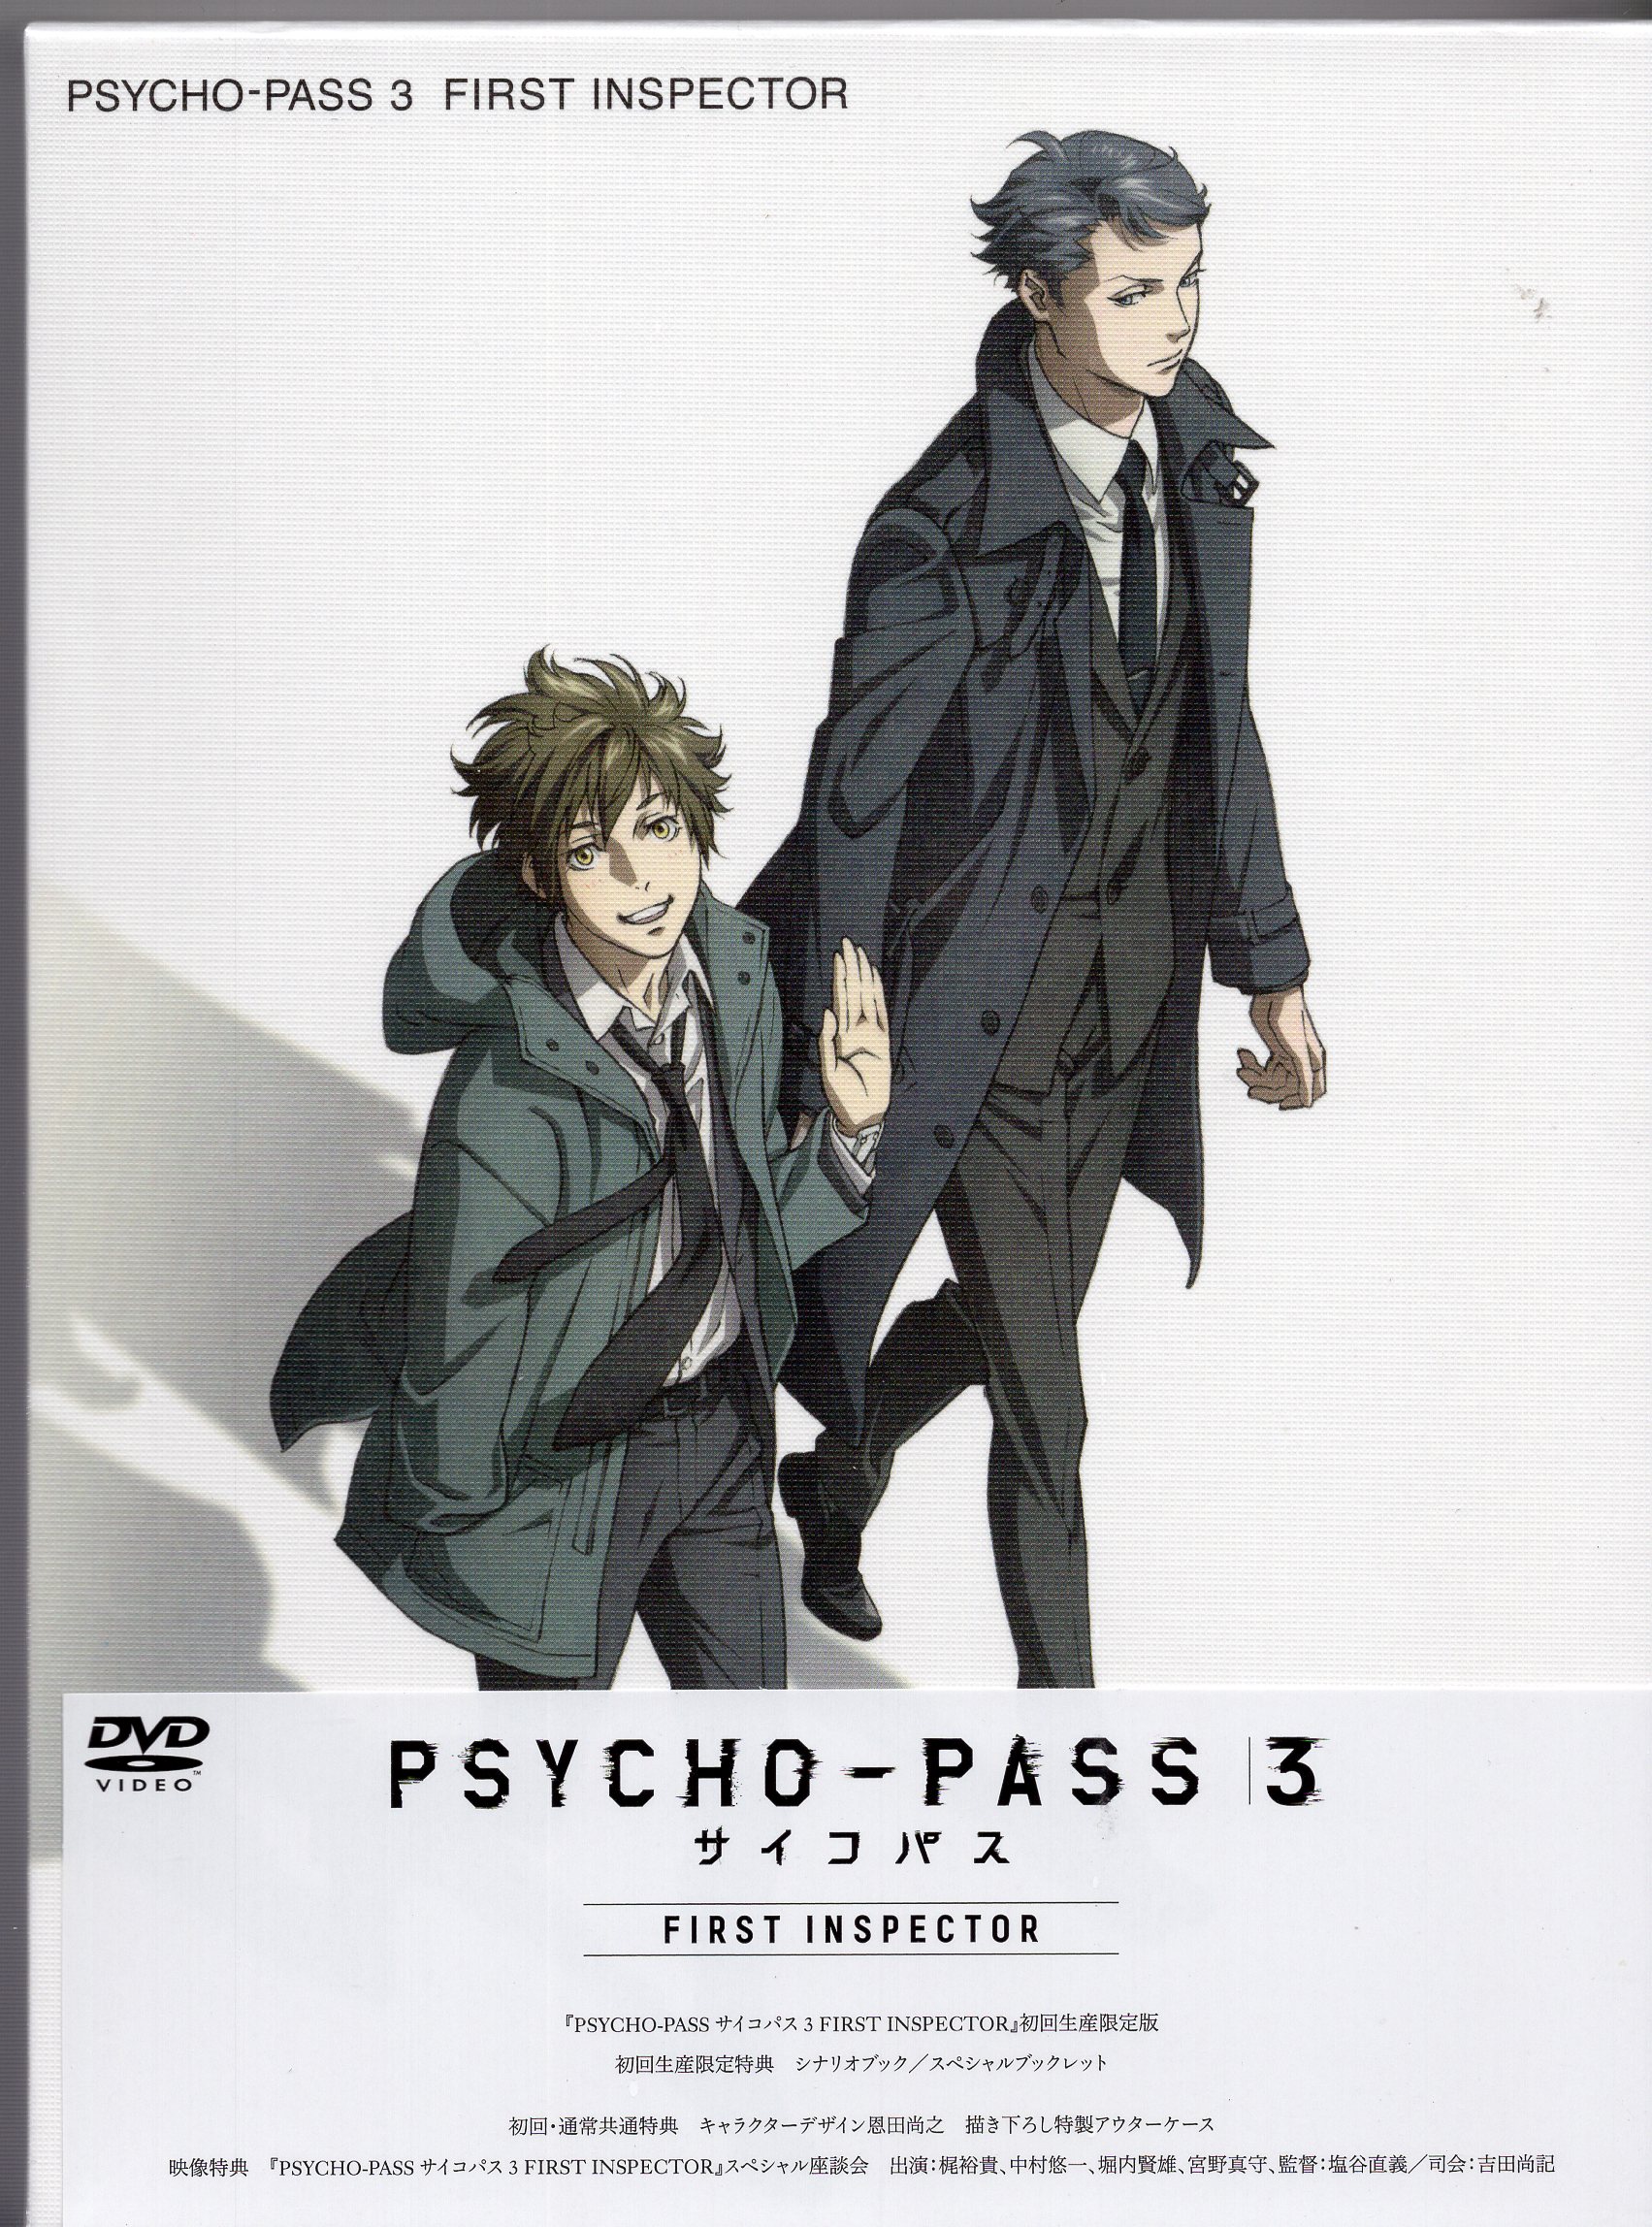 Qoo News] PSYCHO-PASS 3 FIRST INSPECTOR Anime Film Set for Spring 2020